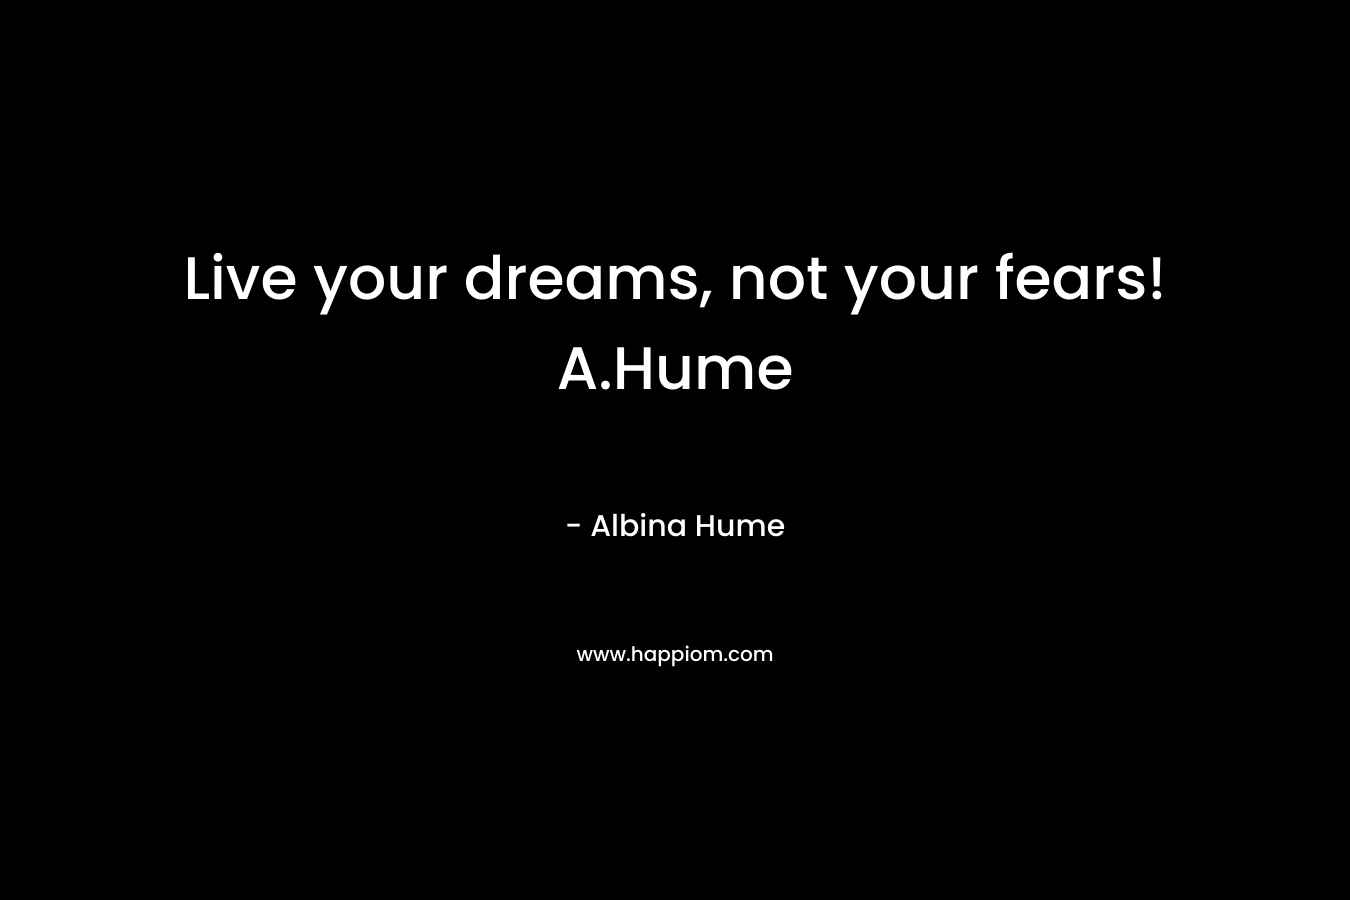 Live your dreams, not your fears! A.Hume